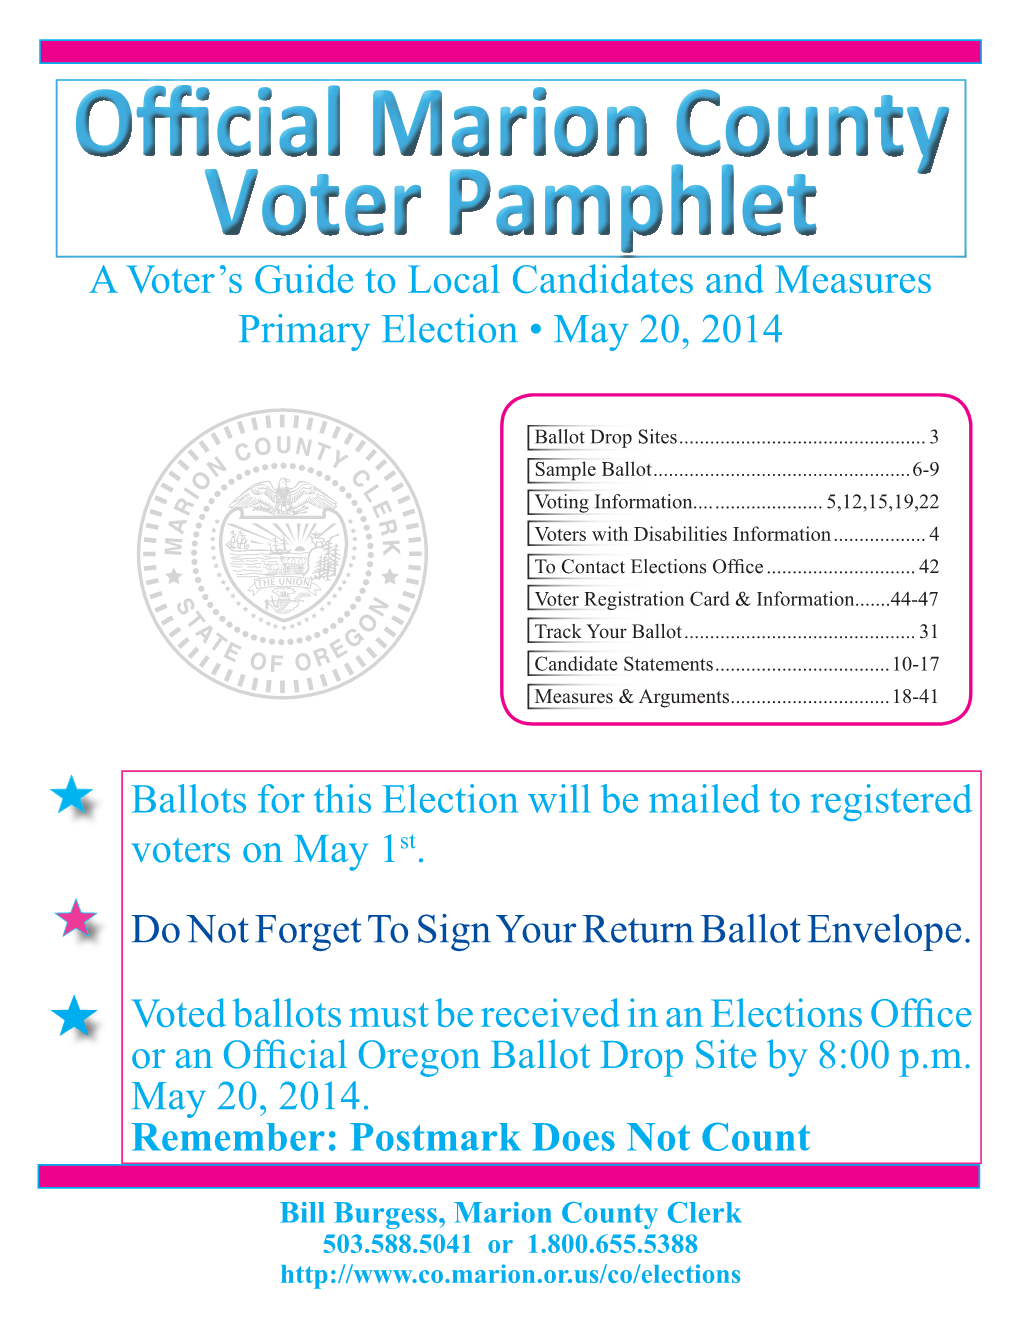 Marion County Voter Pamphlet for the May 20, 2014 Primary Election